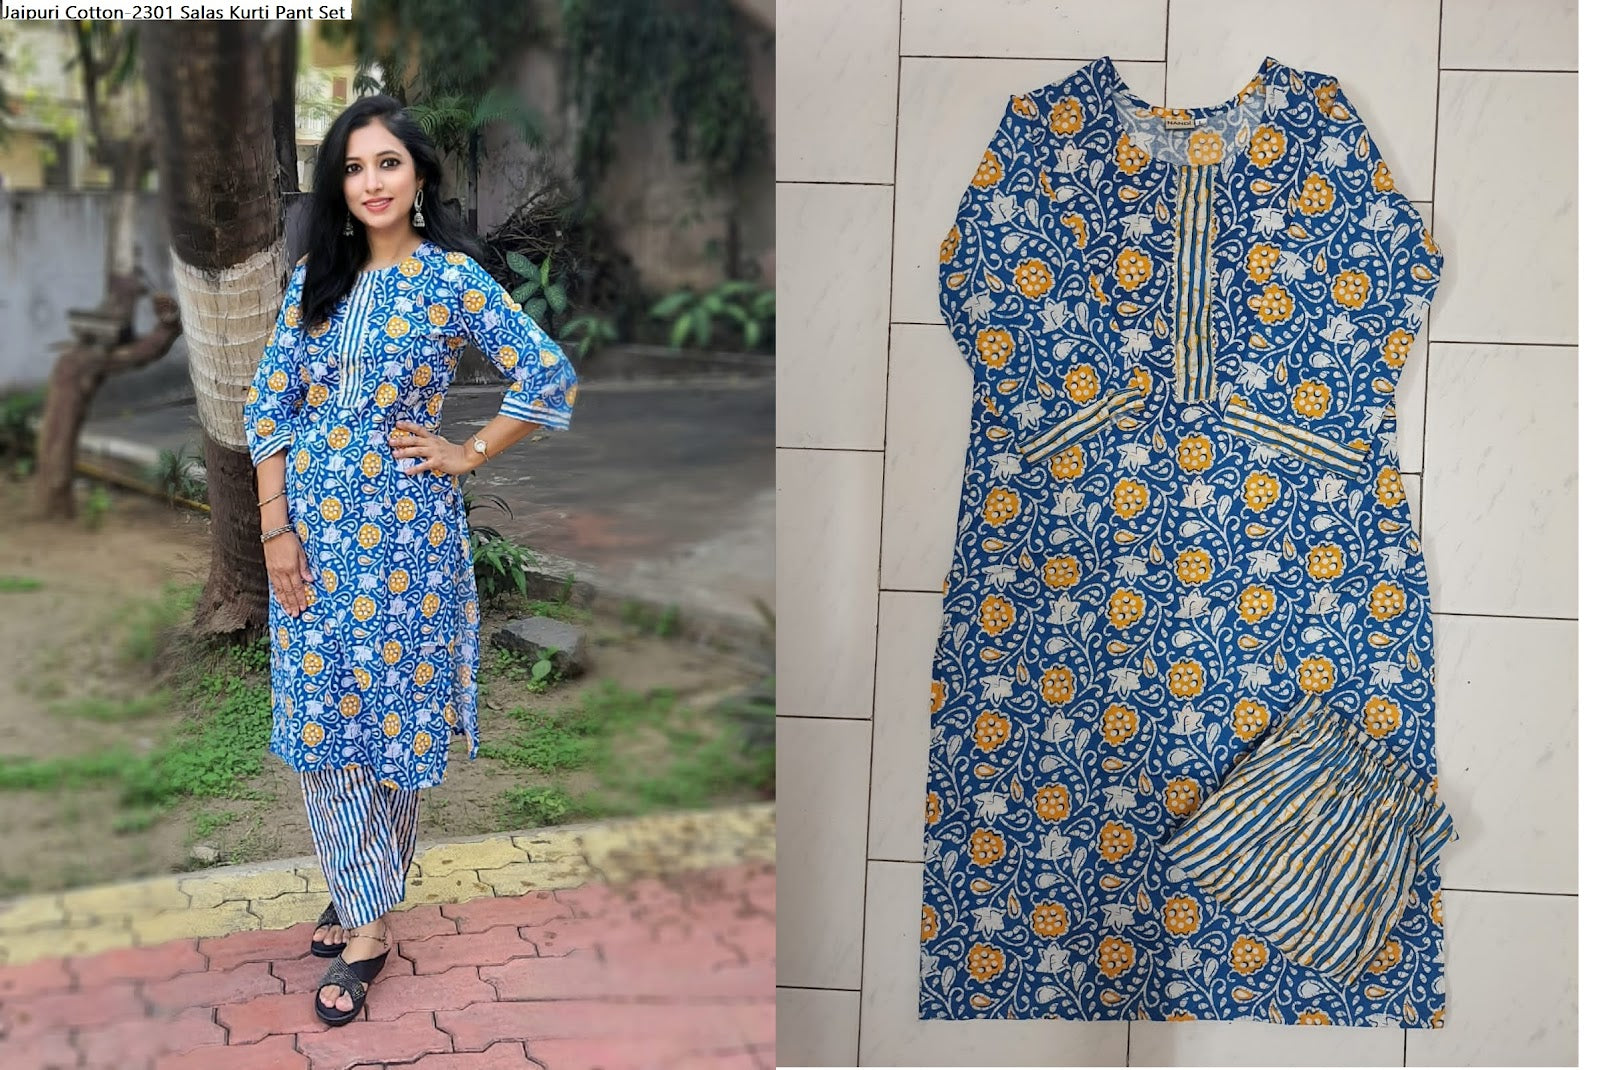 Buy Lookool Kurti Pant Set for Women with Dupatta Pure Cotton Fully  Stitched- Jaipuri Print-Straight-Aqua Blue Color at Amazon.in